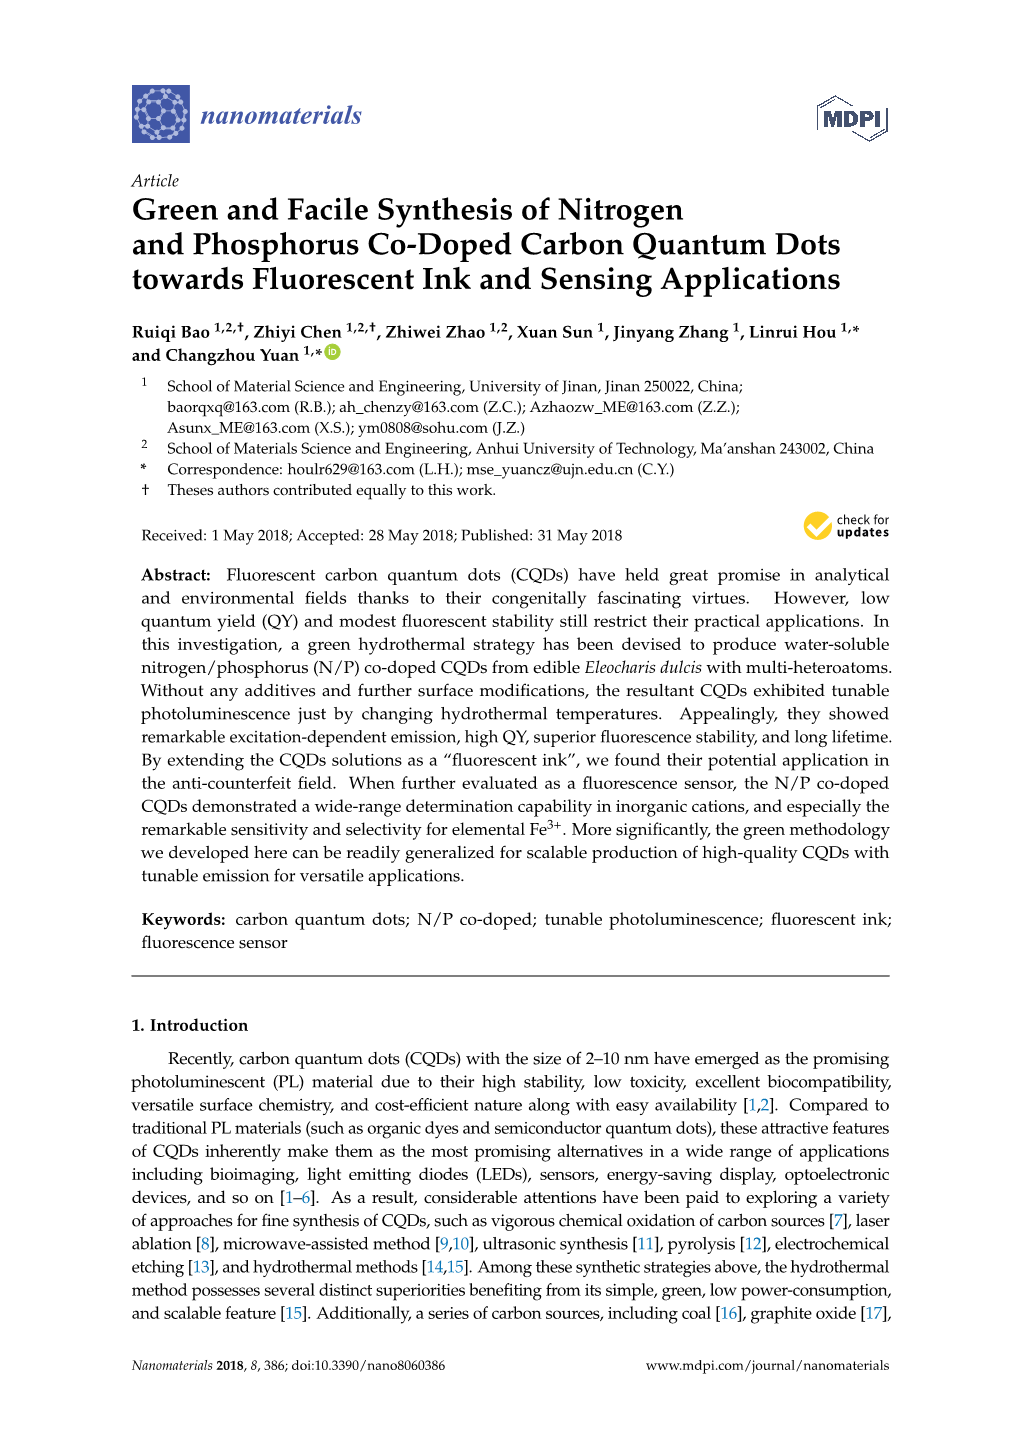 Green and Facile Synthesis of Nitrogen and Phosphorus Co-Doped Carbon Quantum Dots Towards Fluorescent Ink and Sensing Applications